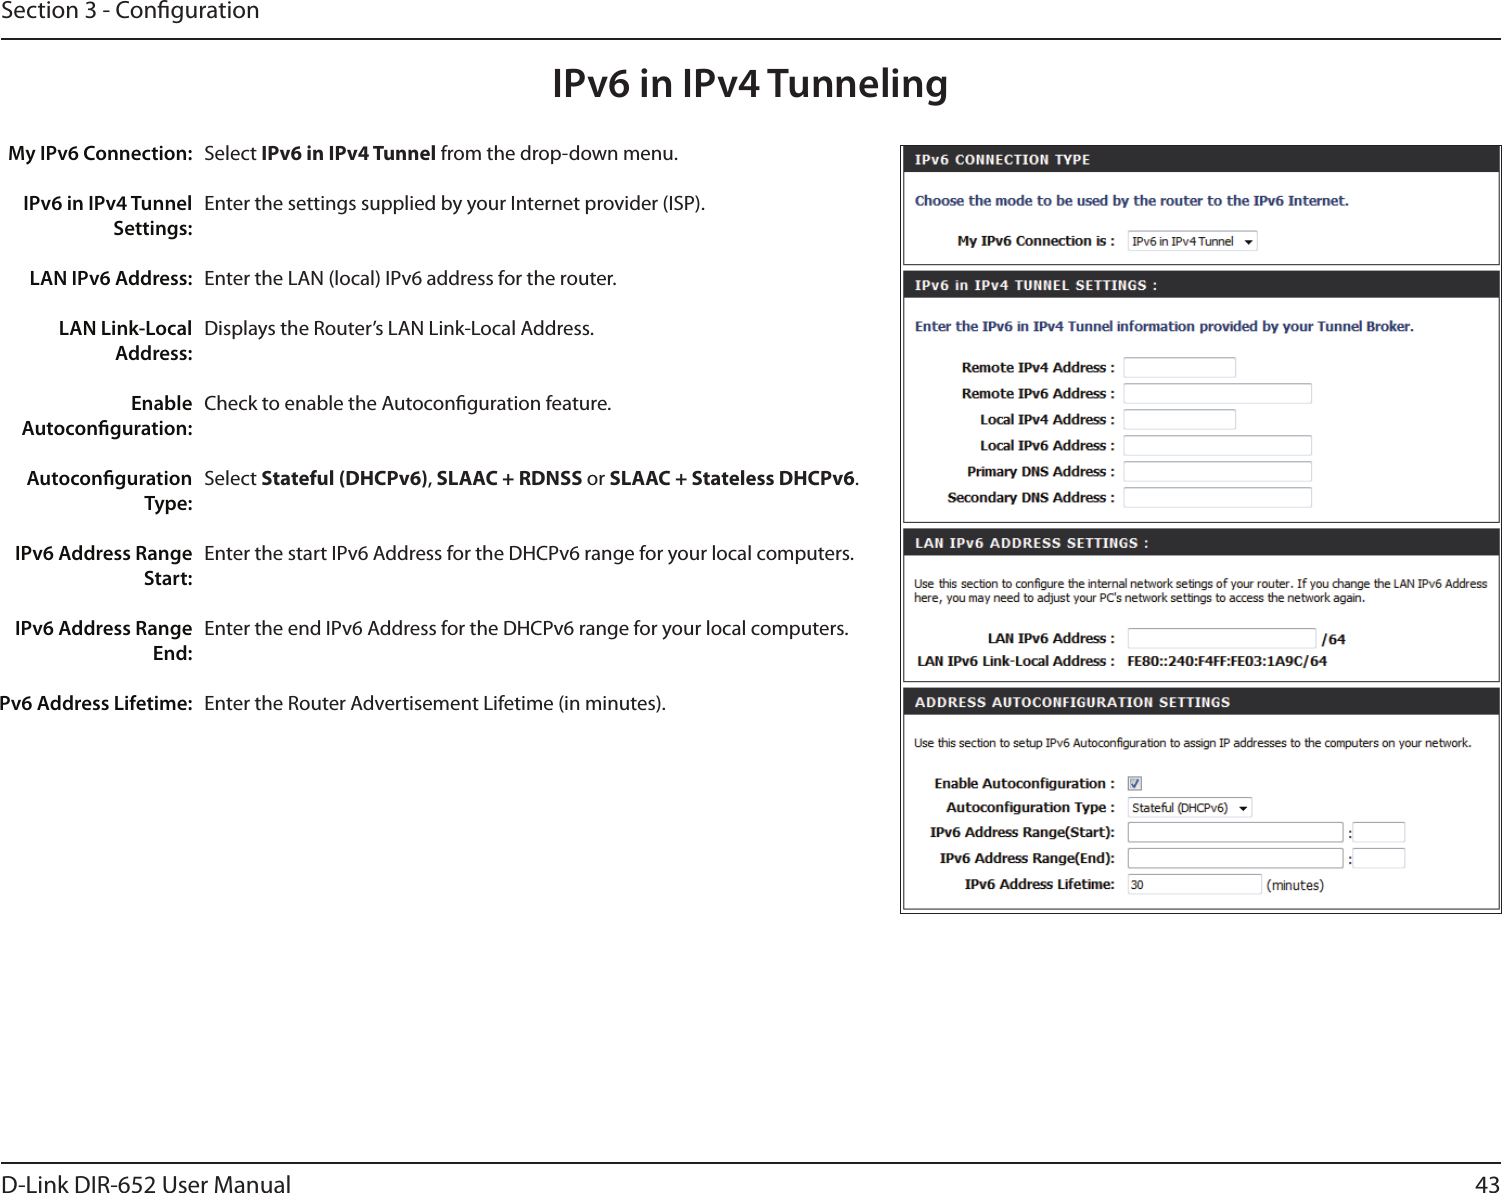 43D-Link DIR-652 User ManualSection 3 - CongurationIPv6 in IPv4 TunnelingSelect IPv6 in IPv4 Tunnel from the drop-down menu.Enter the settings supplied by your Internet provider (ISP). Enter the LAN (local) IPv6 address for the router. Displays the Router’s LAN Link-Local Address.Check to enable the Autoconguration feature.Select Stateful (DHCPv6), SLAAC + RDNSS or SLAAC + Stateless DHCPv6. Enter the start IPv6 Address for the DHCPv6 range for your local computers.Enter the end IPv6 Address for the DHCPv6 range for your local computers.Enter the Router Advertisement Lifetime (in minutes).My IPv6 Connection:IPv6 in IPv4 Tunnel Settings:LAN IPv6 Address:LAN Link-Local Address:Enable Autoconguration:Autoconguration Type:IPv6 Address Range Start:IPv6 Address Range End:Pv6 Address Lifetime: